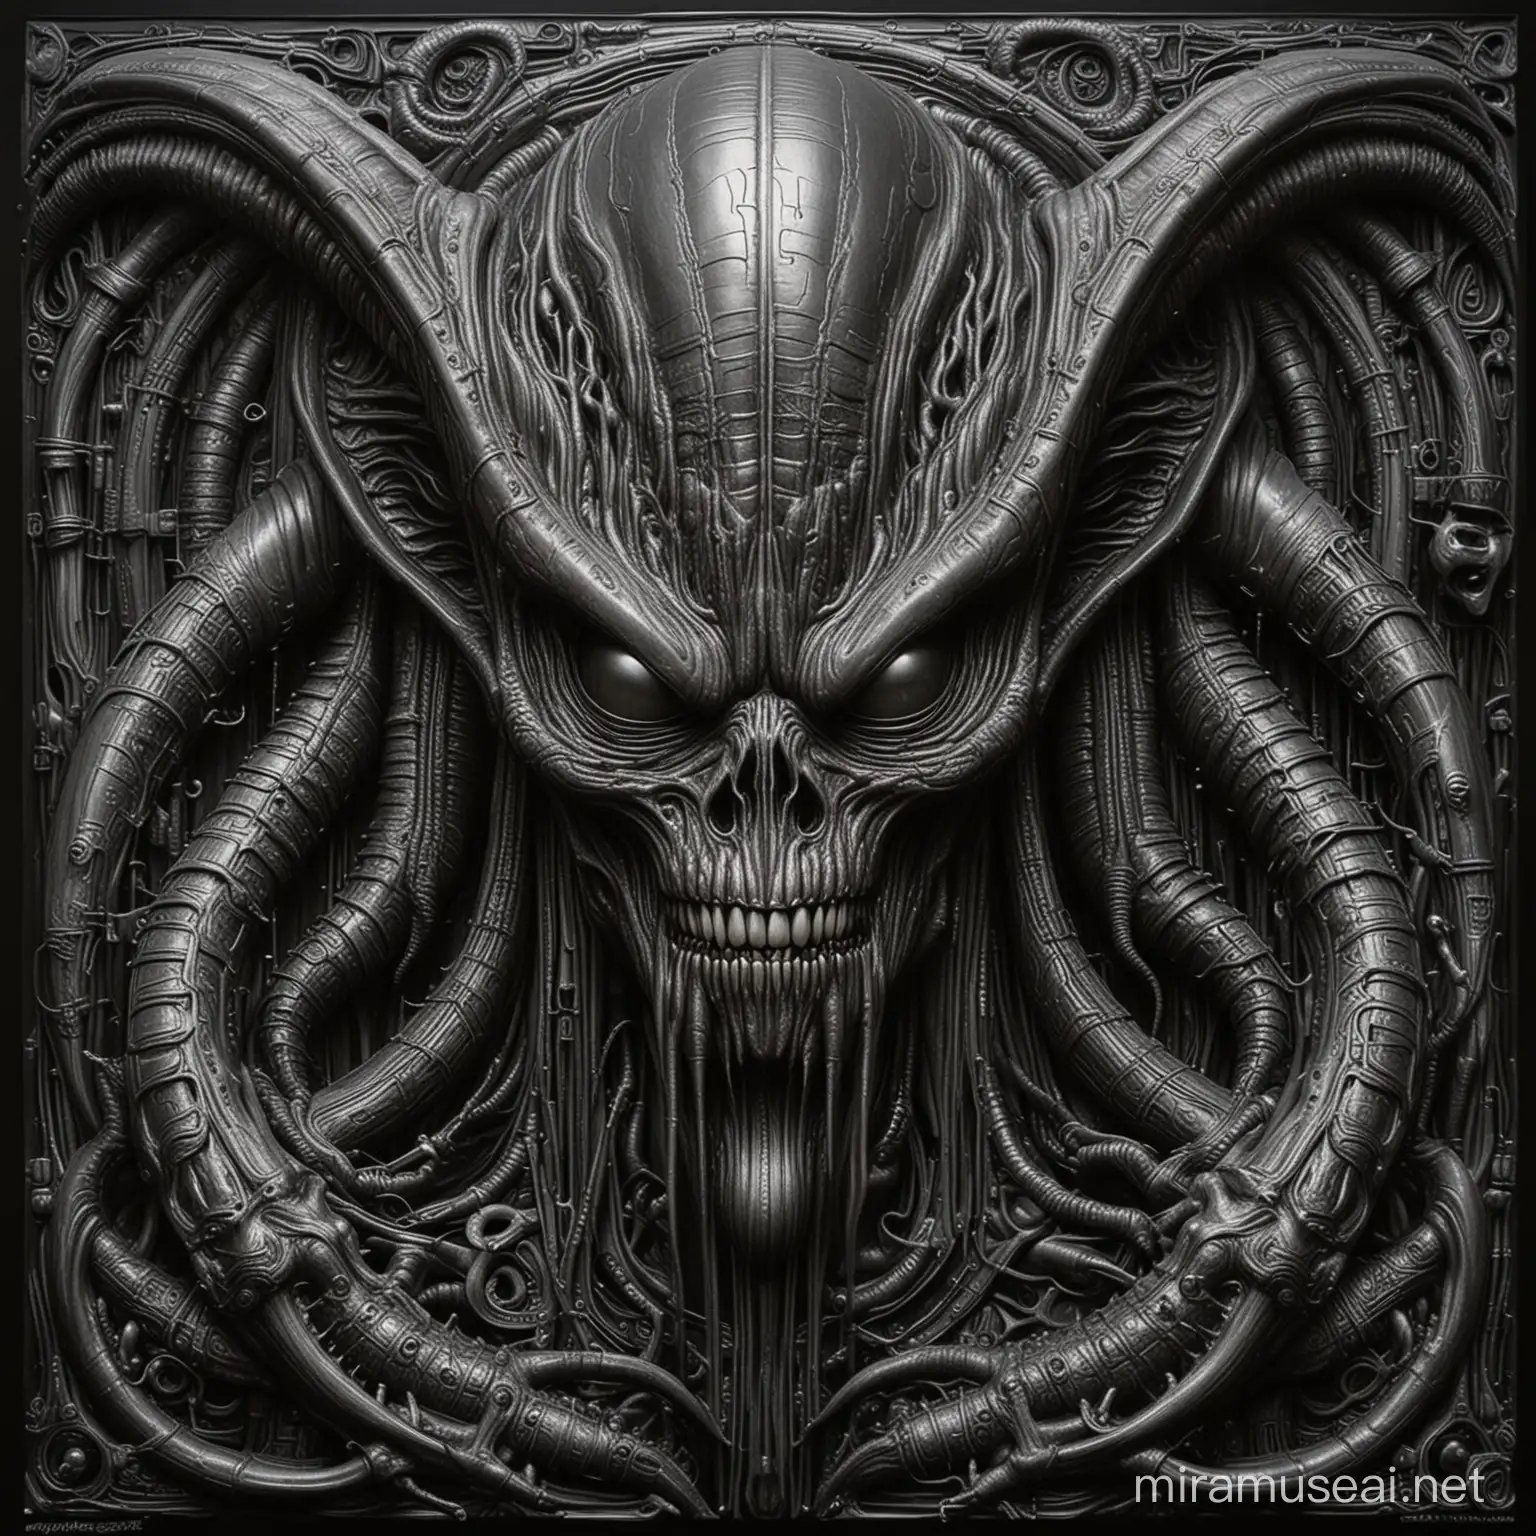 Giger Alien Artwork Inspired by Big Daddy Roth and Rat Fink